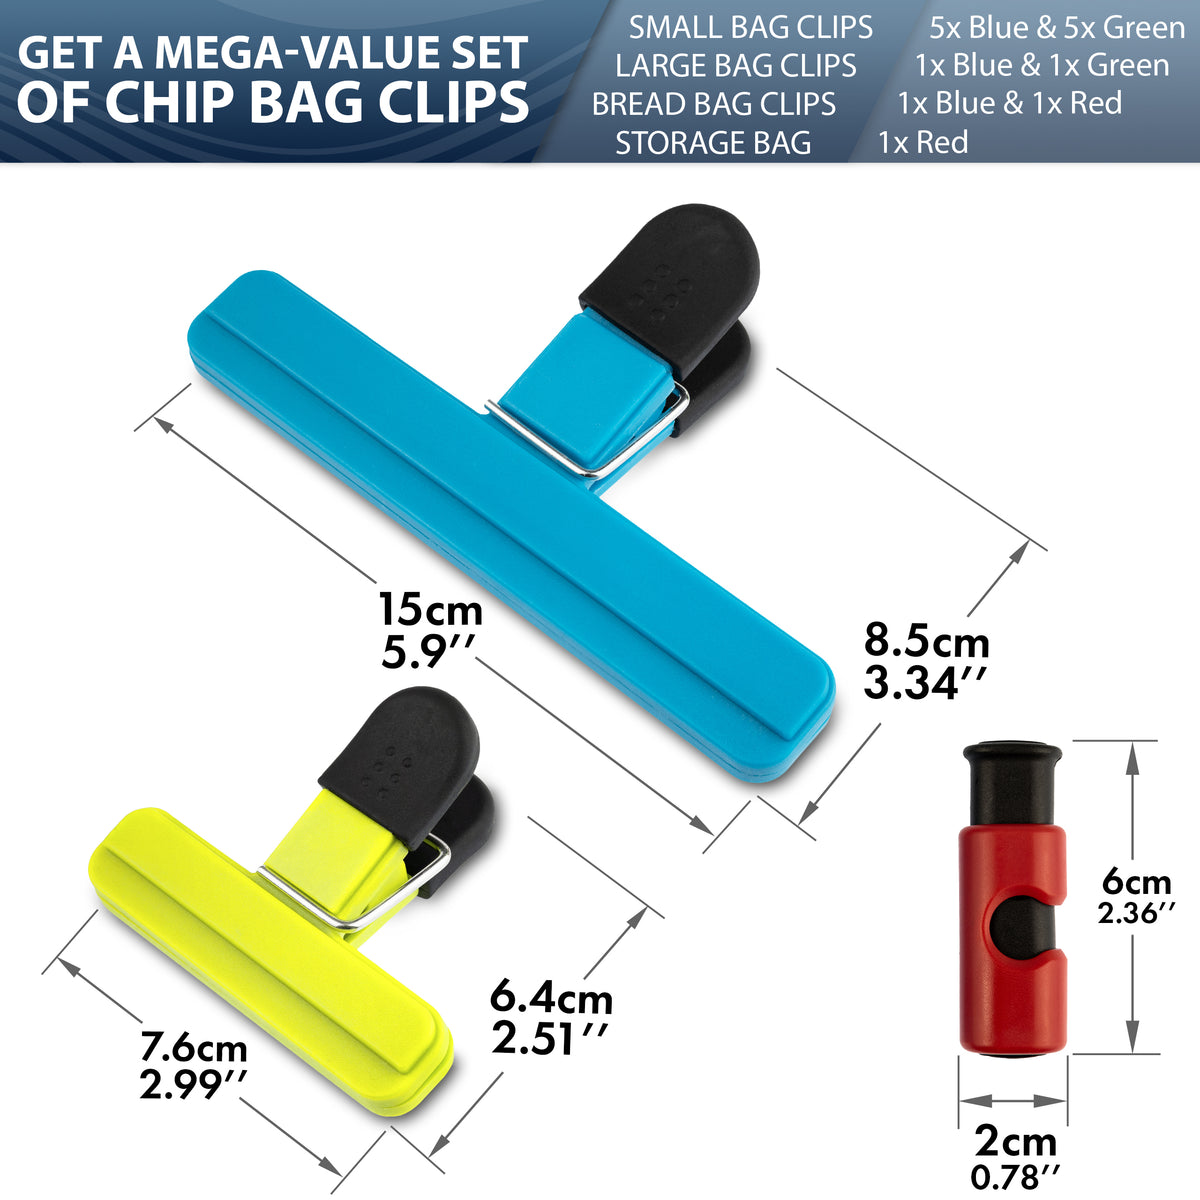 Dropship Large Chip Bag Clip Stainless Steel Heavy Duty Food Clip Great For  Air Tight Seal Grip On Coffee & Bread Bags Kitchen Home Office Usage to  Sell Online at a Lower